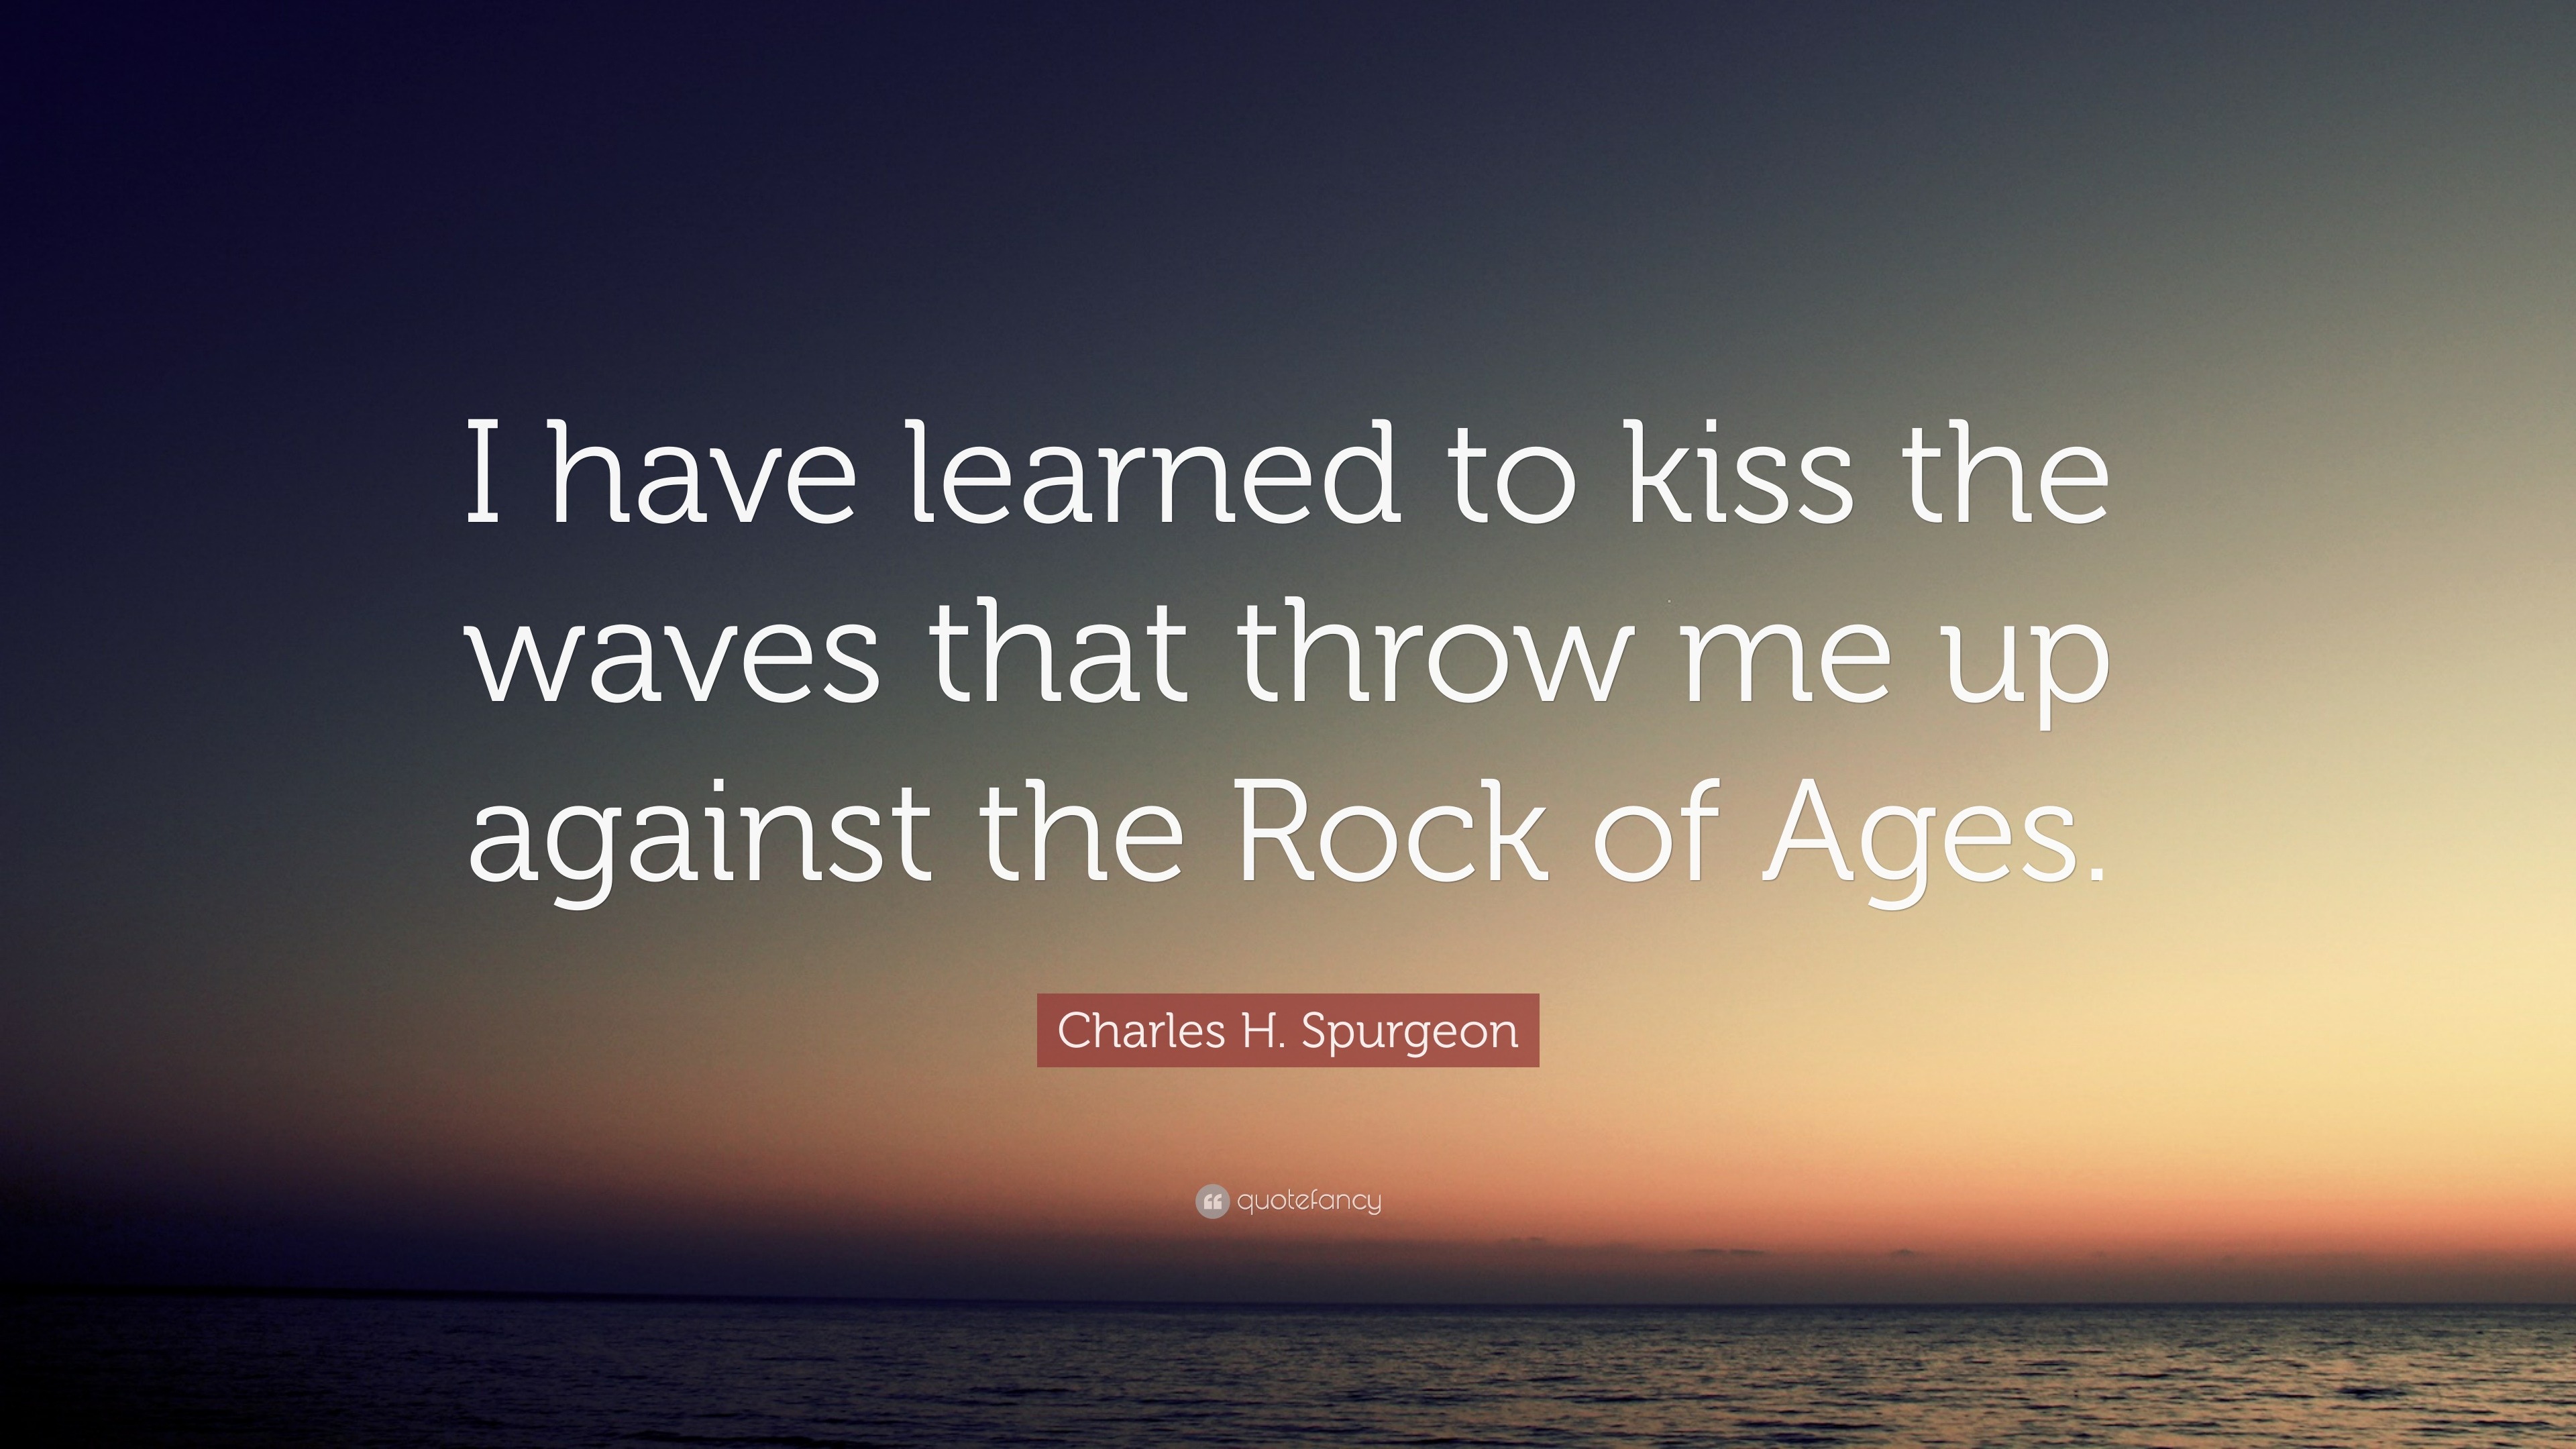 Charles H. Spurgeon Quote “I have learned to kiss the